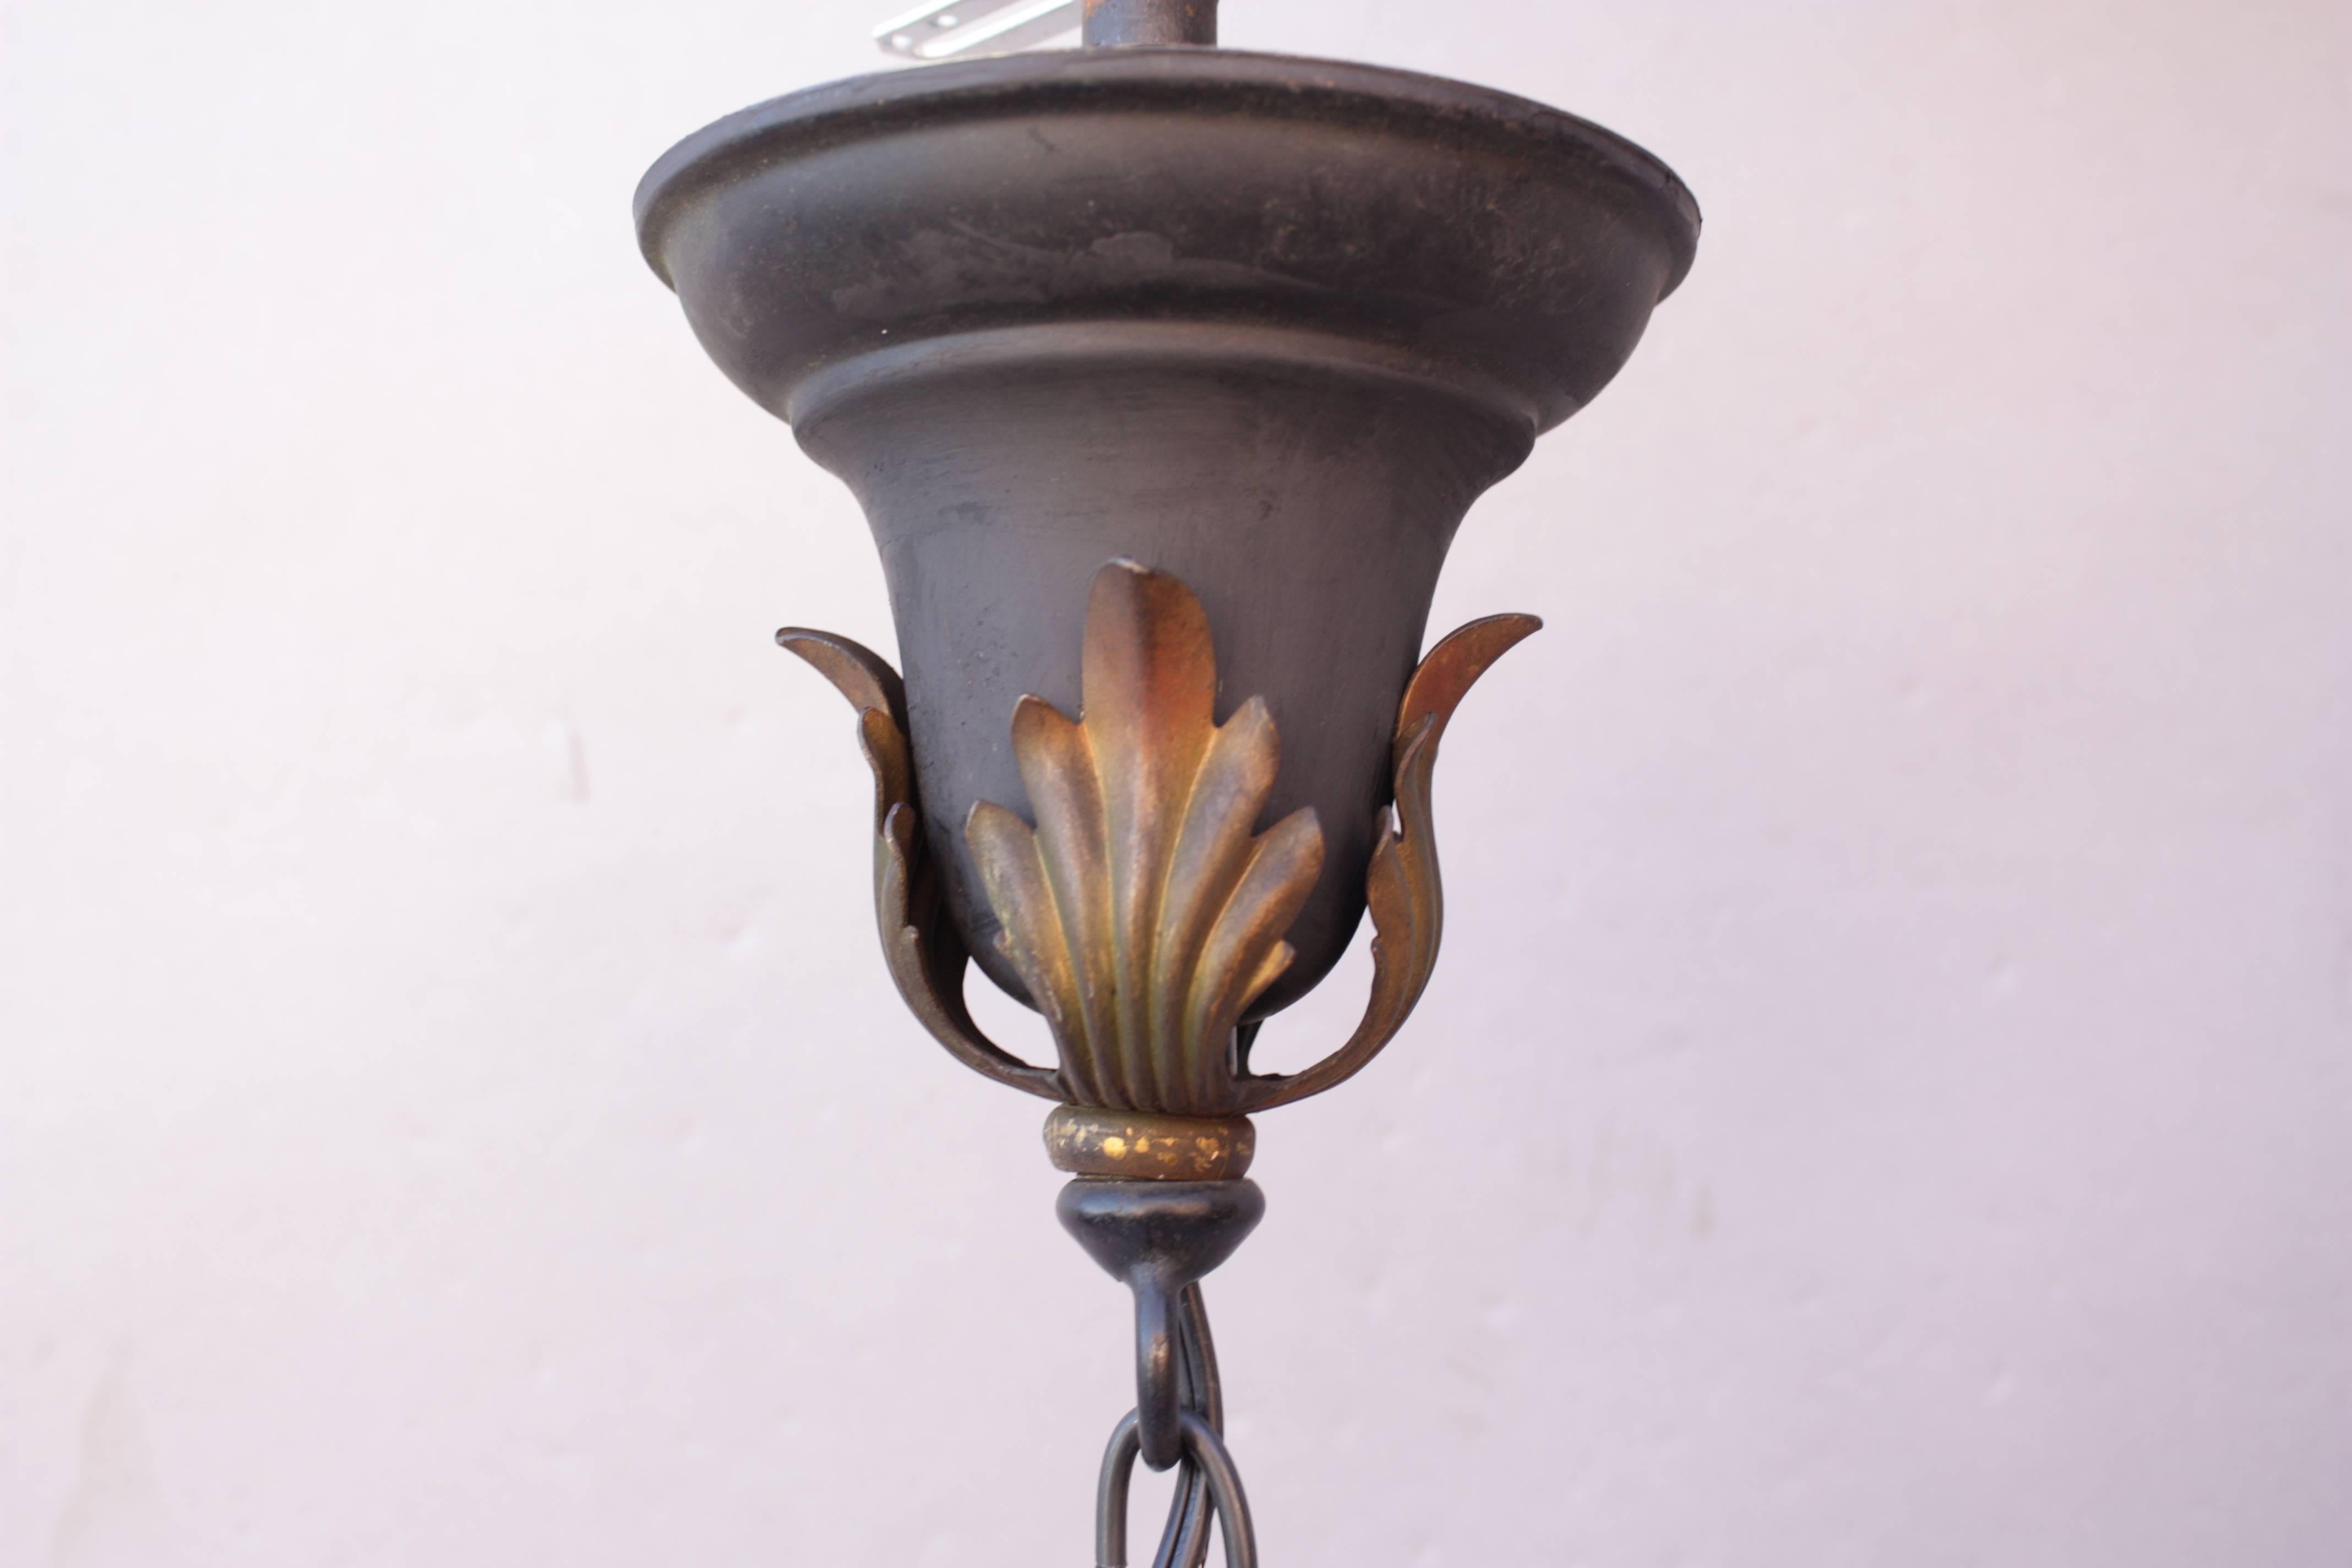 Spanish Revival chandelier with original polychrome finish, 1920s. The chain can easily reduced for low ceilings. 

Measures: 14